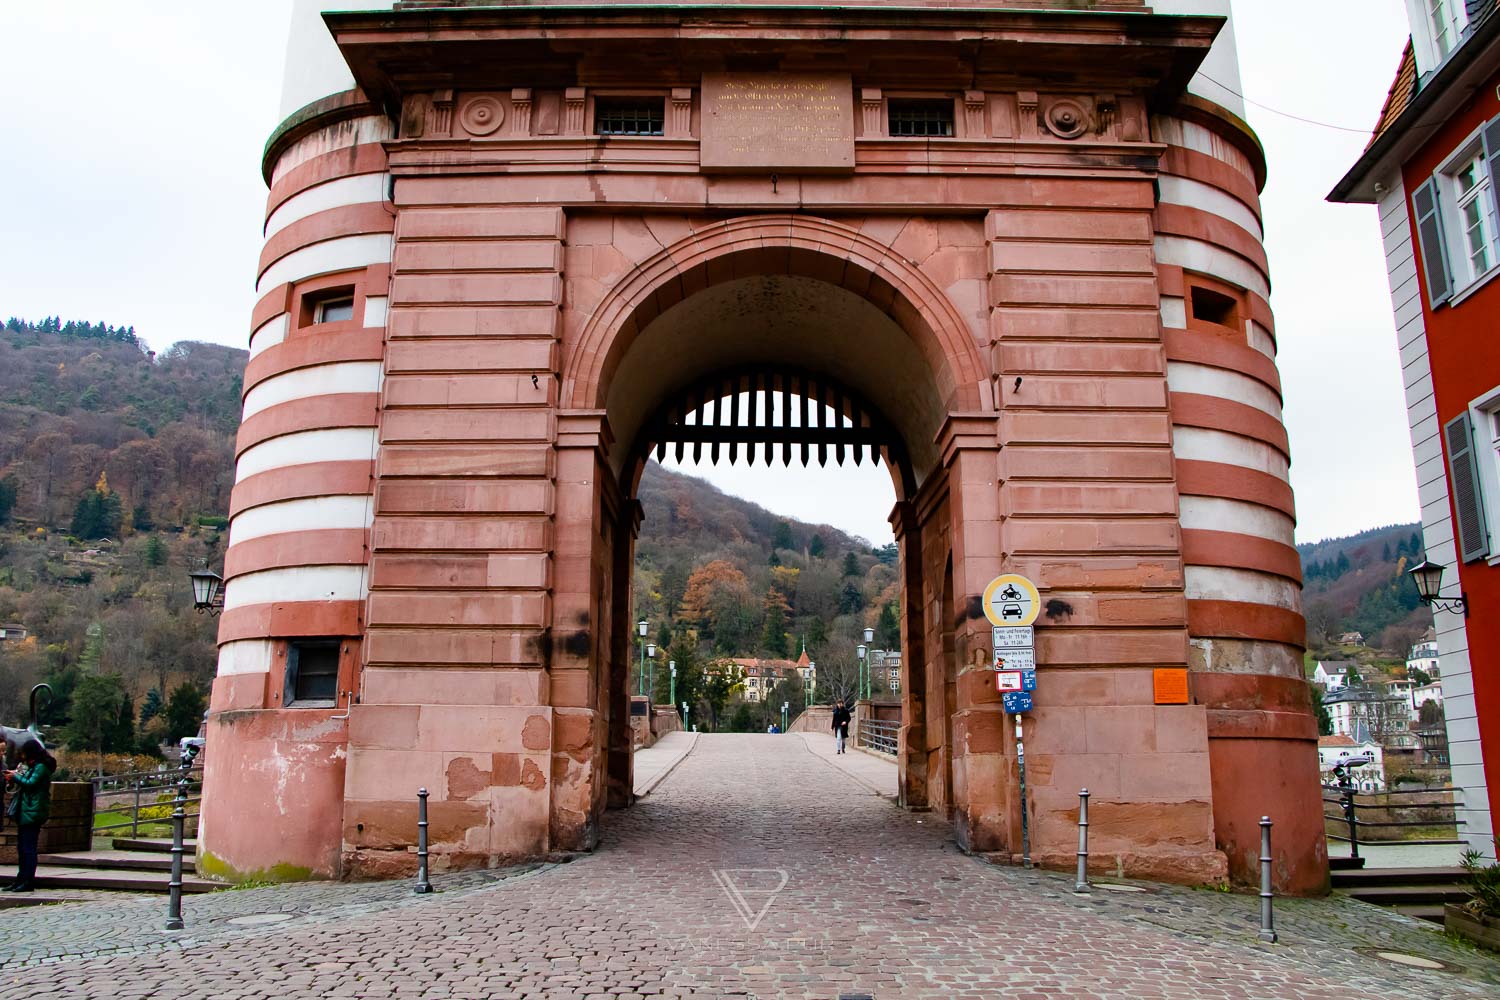 Heidelberg sightseeing top 10 - tips & city tour - Heidelberg in Germany, Heidelberg sightseeing, tips & city tour. 24 hours in Heidelberg, first visit, river, impression,